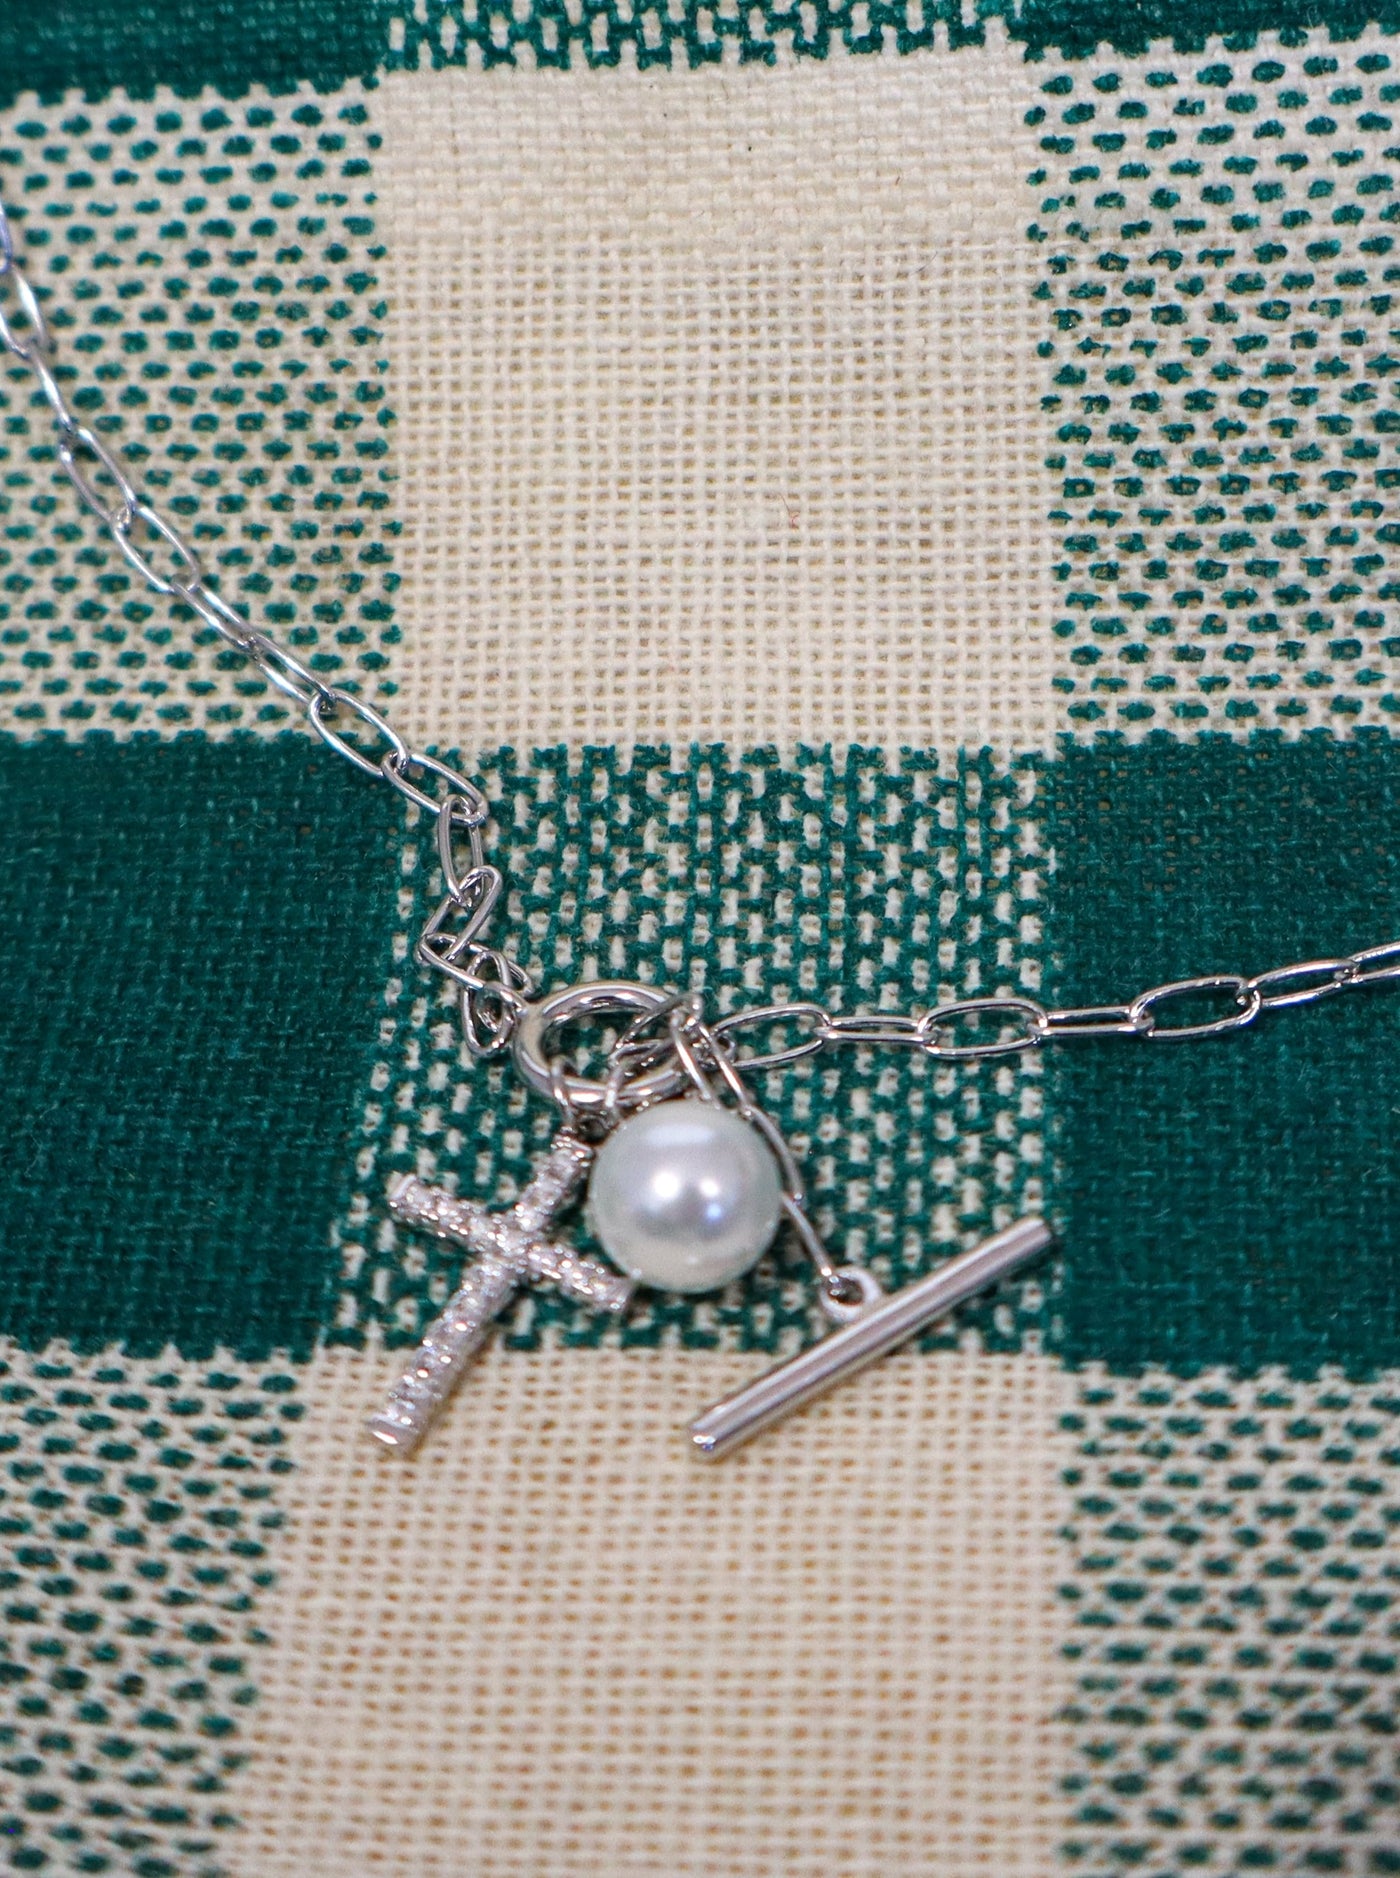 Silver chain necklace with a cross and pearl pendant.